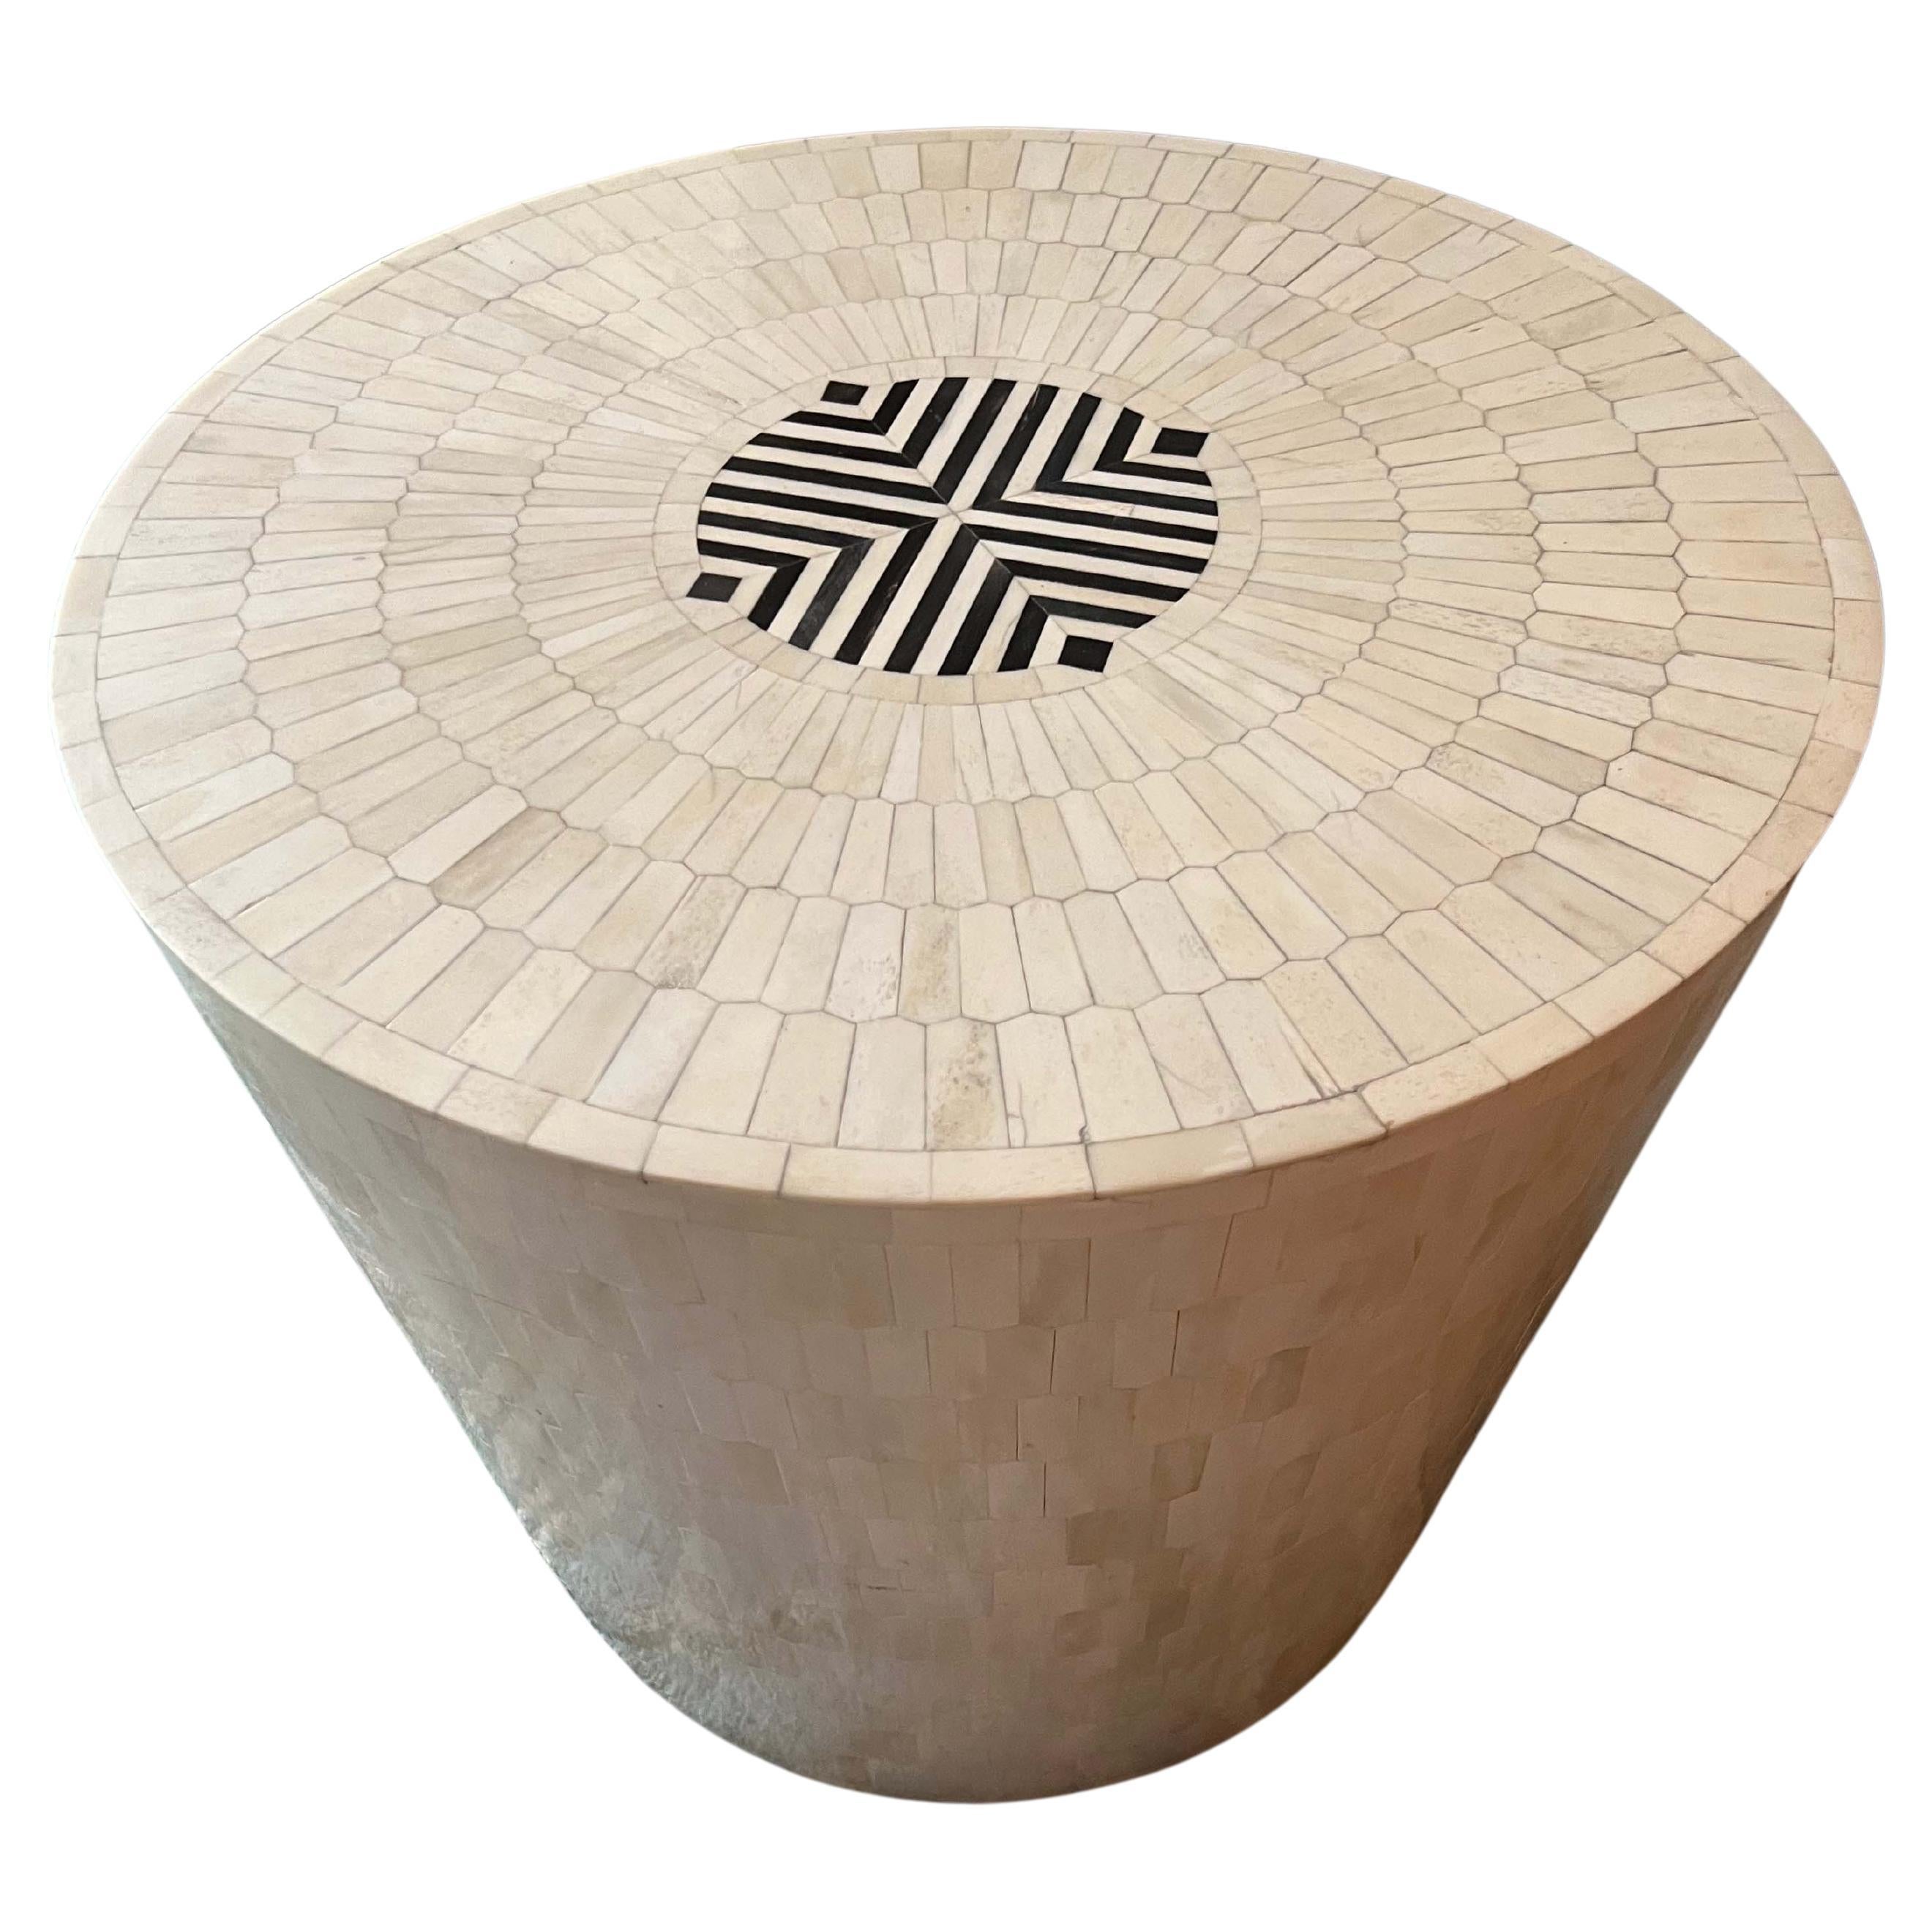 Made of wood and then tessellated with hundreds of sustainably sourced, hand carved hexagonal bone chips the Arena stool or end table flaunts a subtle tone-on-tone pattern. The top is decorated with contrasting inlay horn, which can be replaced a